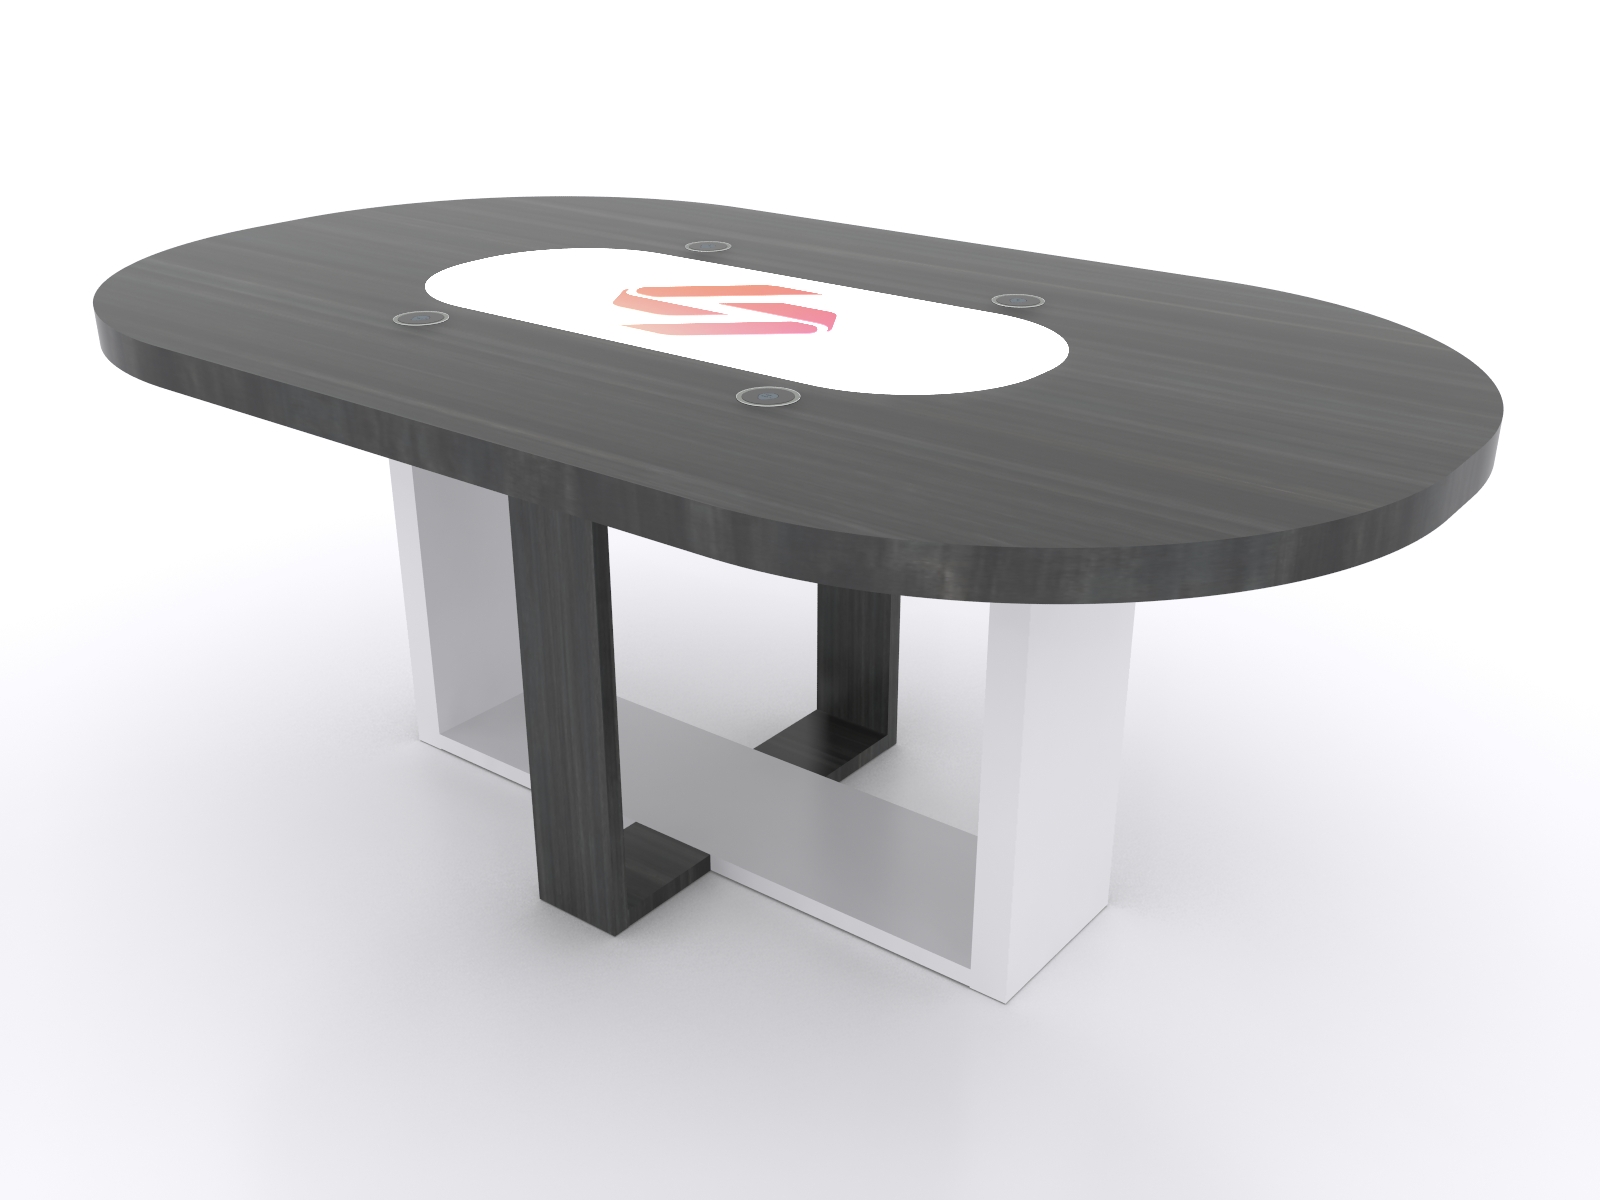 MOD-1487 Wireless Trade Show and Event Charging Table -- Image 3